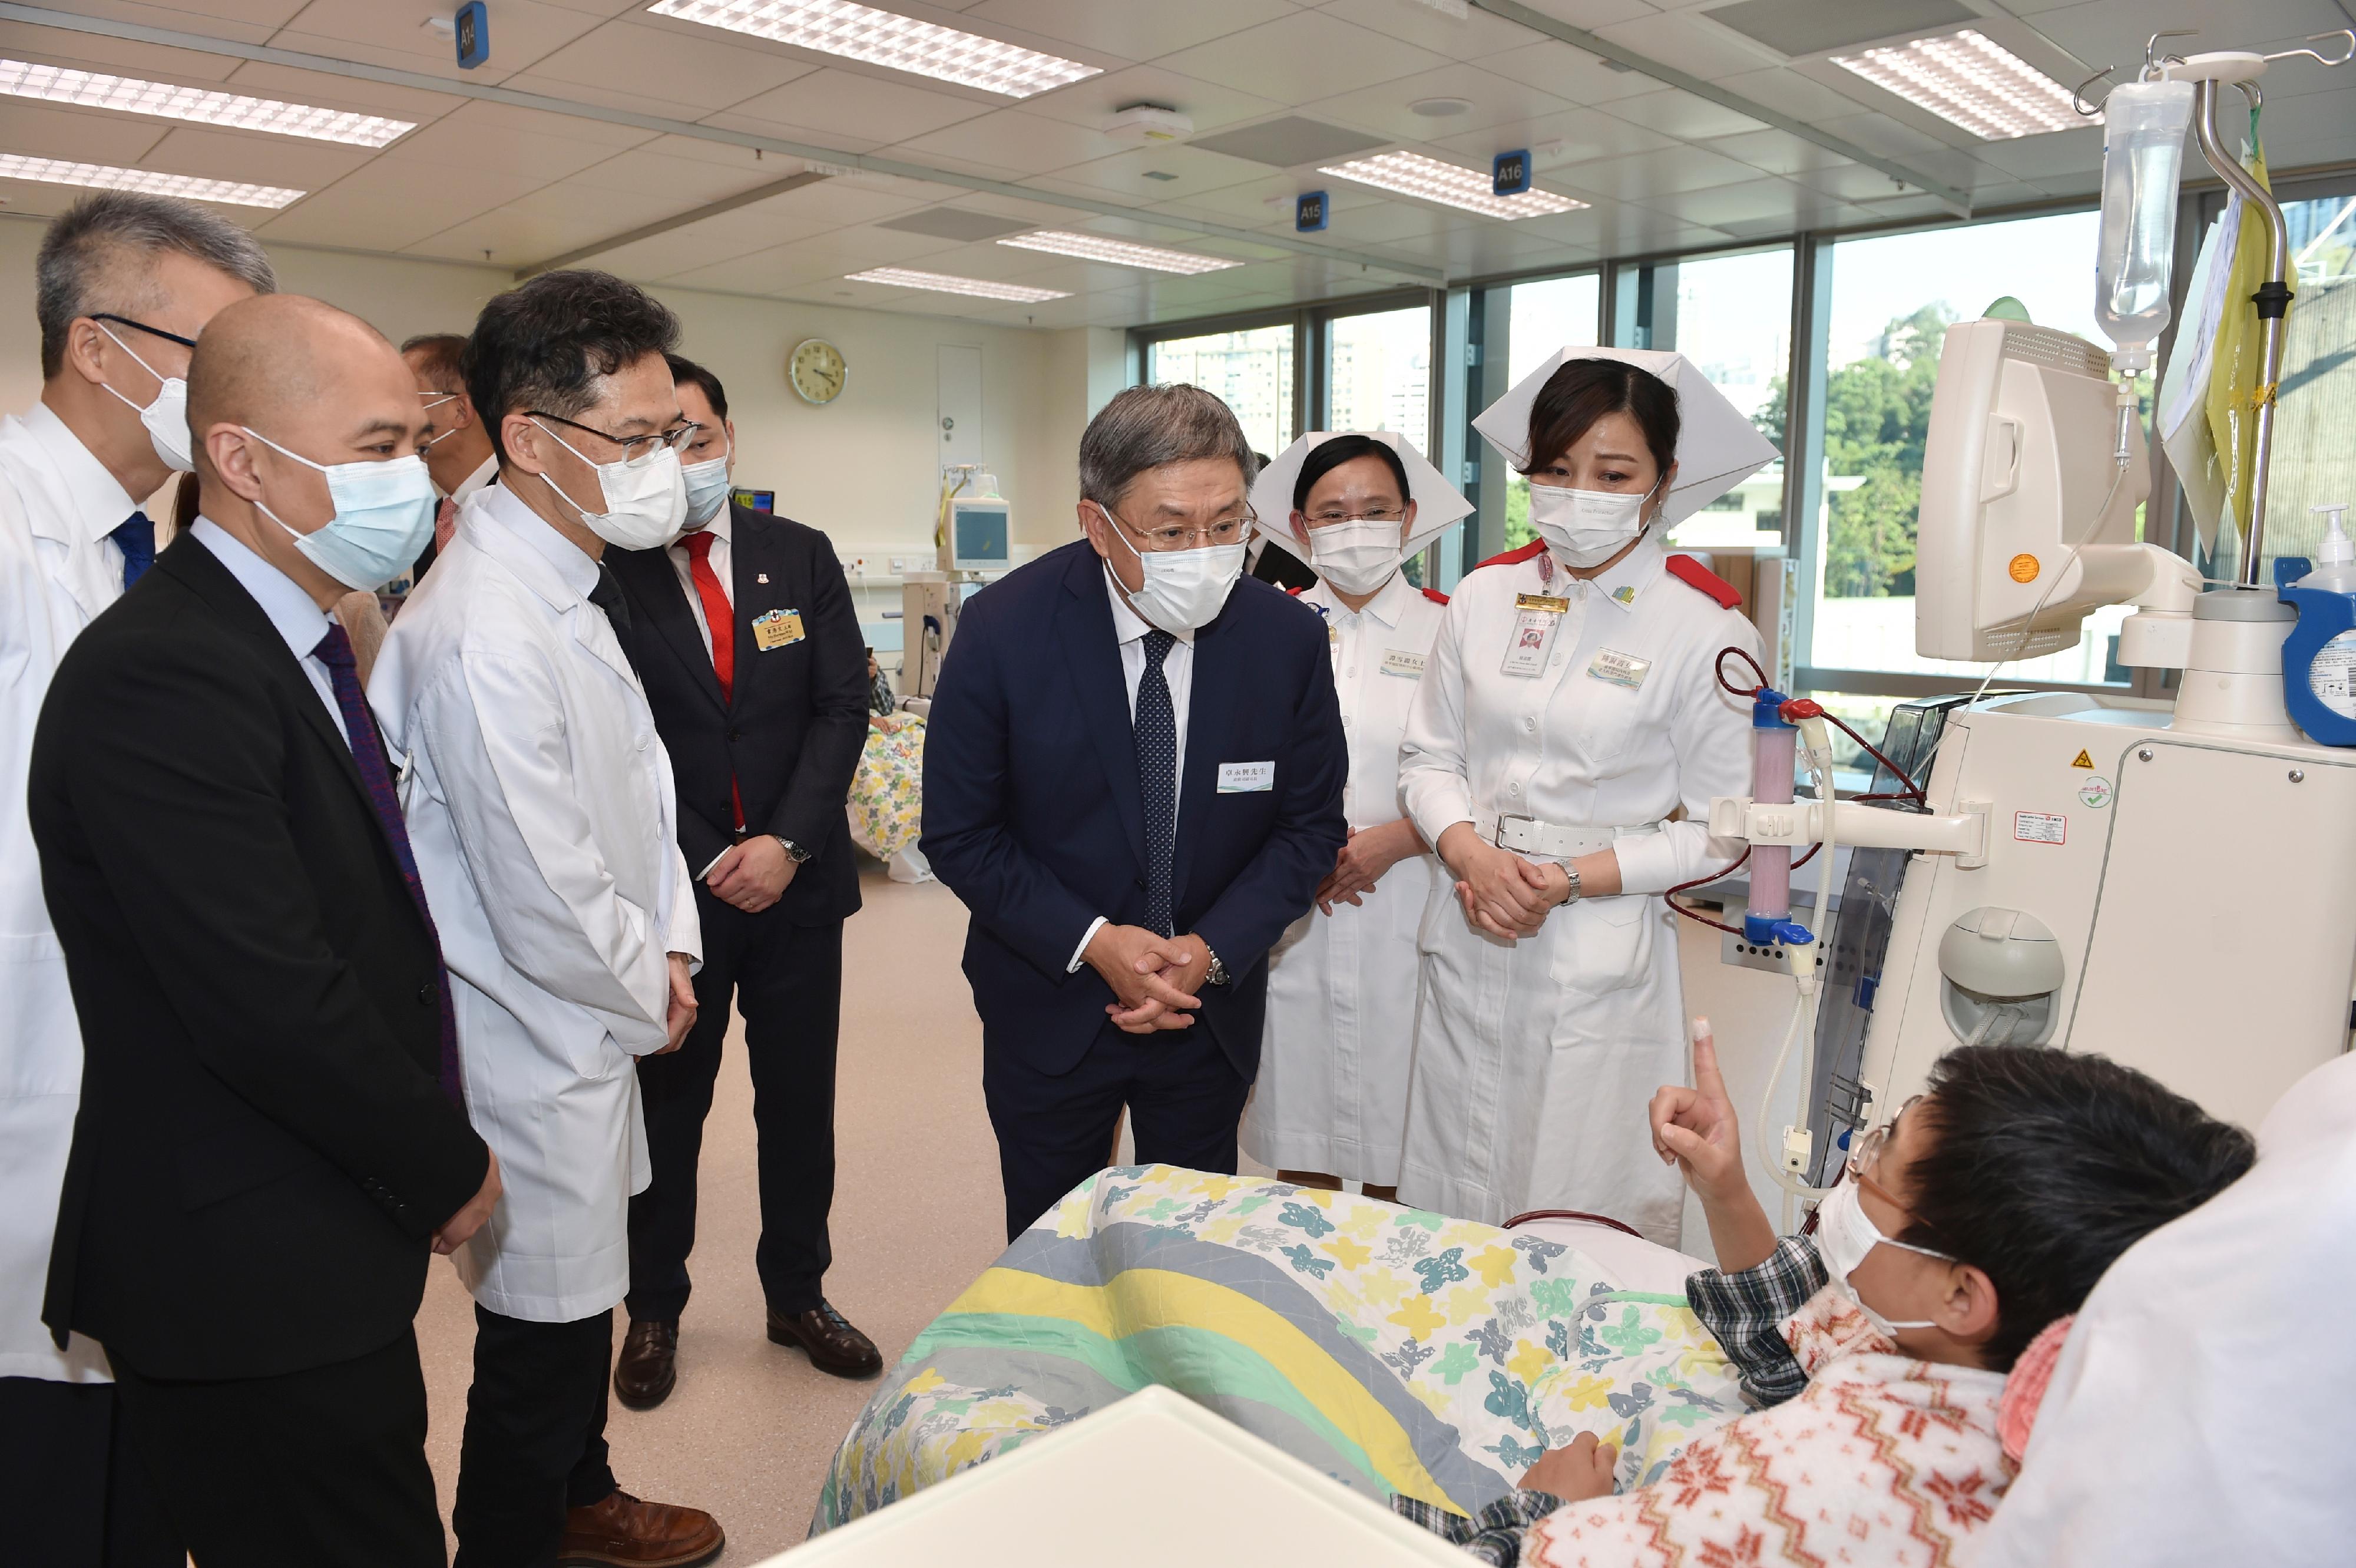 The Deputy Chief Secretary for Administration, Mr Cheuk Wing-hing (third right), visited the Haemodialysis Centre of the Department of Medicine & Geriatrics at Kwong Wah Hospital Phase 1 building and engaged in a conversation with a patient today (November 28).